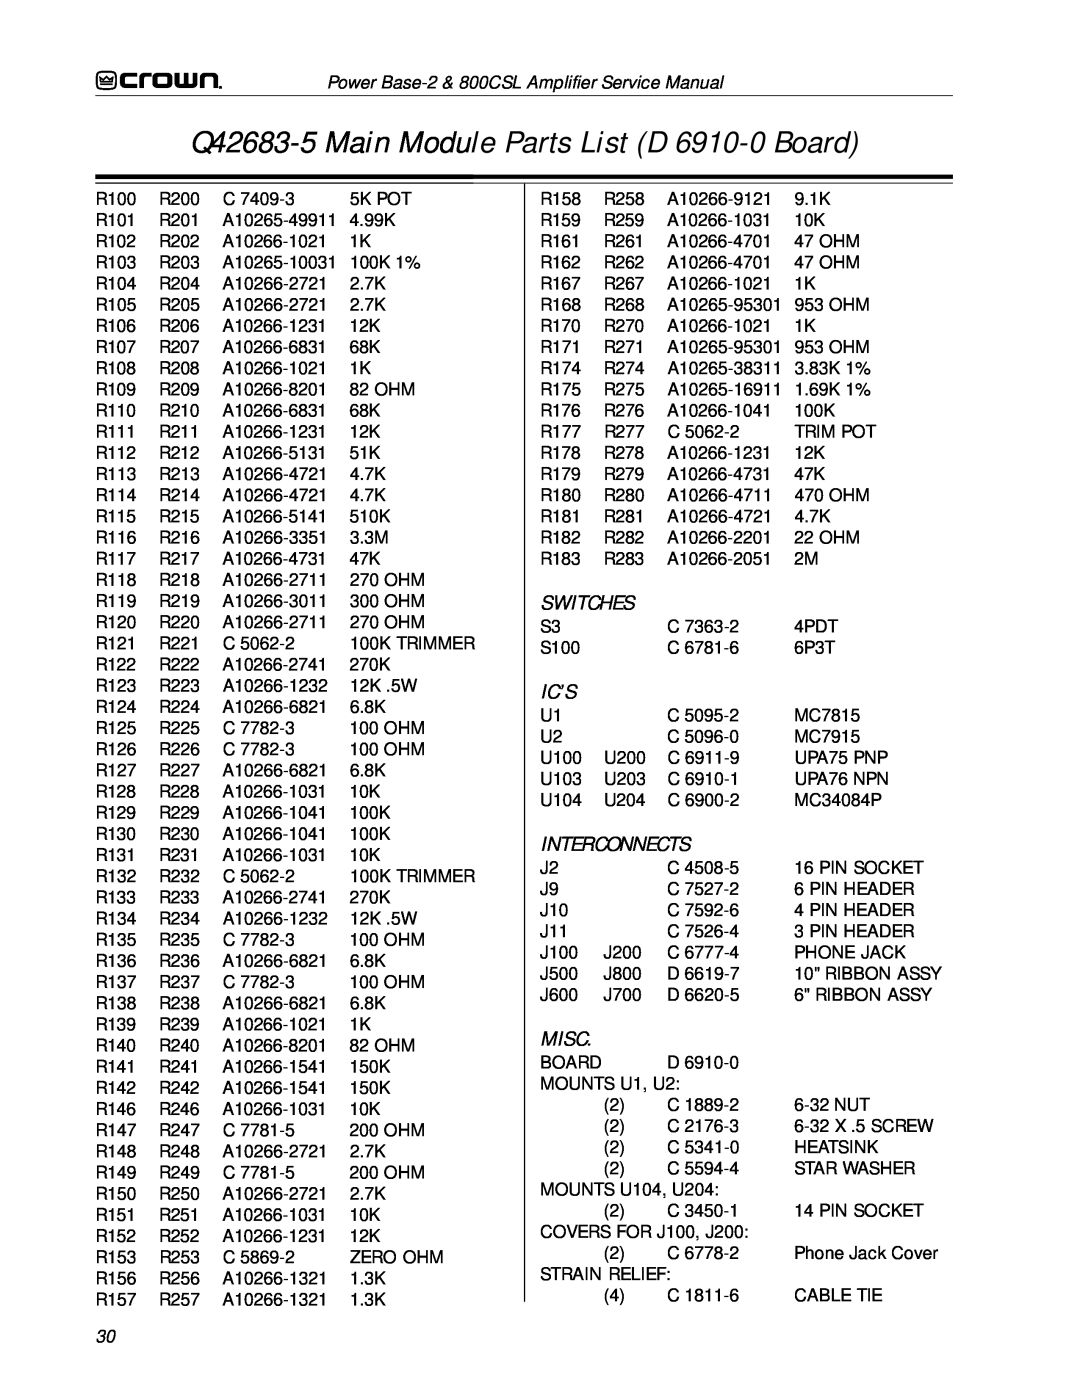 Crown Audio 800CSL service manual Interconnects, Q42683-5Main Module Parts List D 6910-0Board, Switches, Ic’S, Misc 